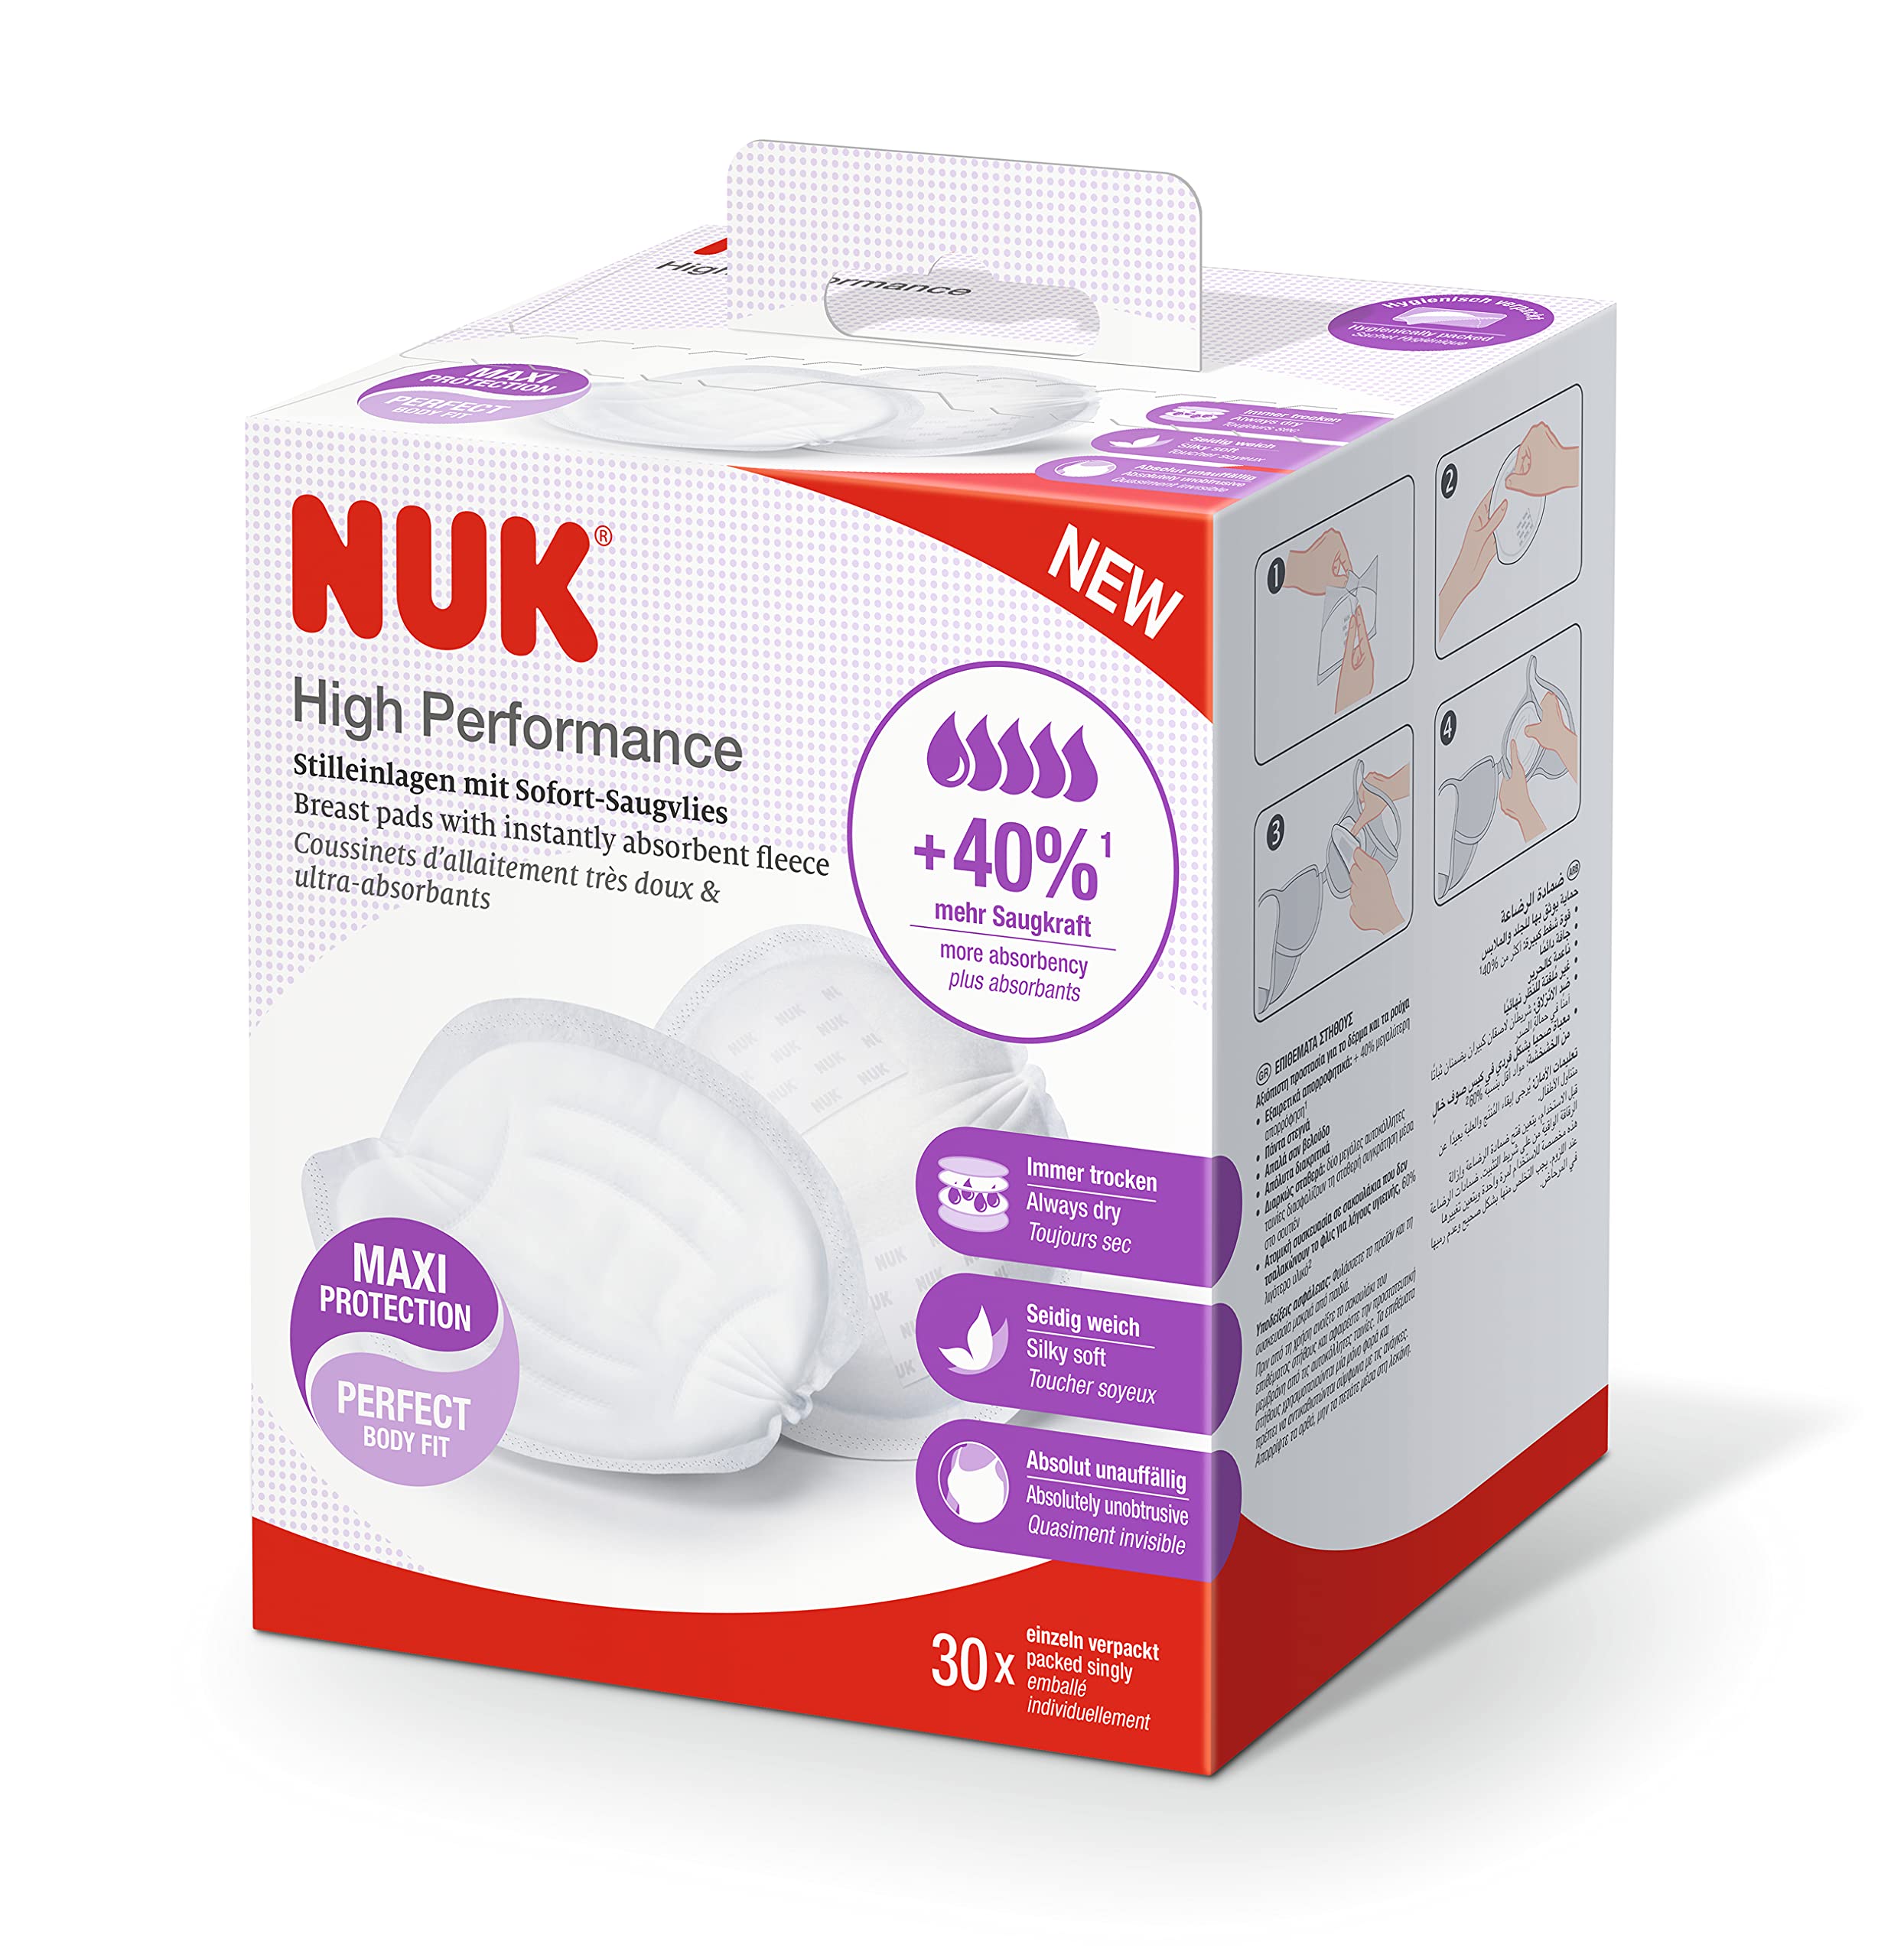 NUK High Performance Disposable Breast Pads | Nursing Pads for Breastfeeding | 30 Count